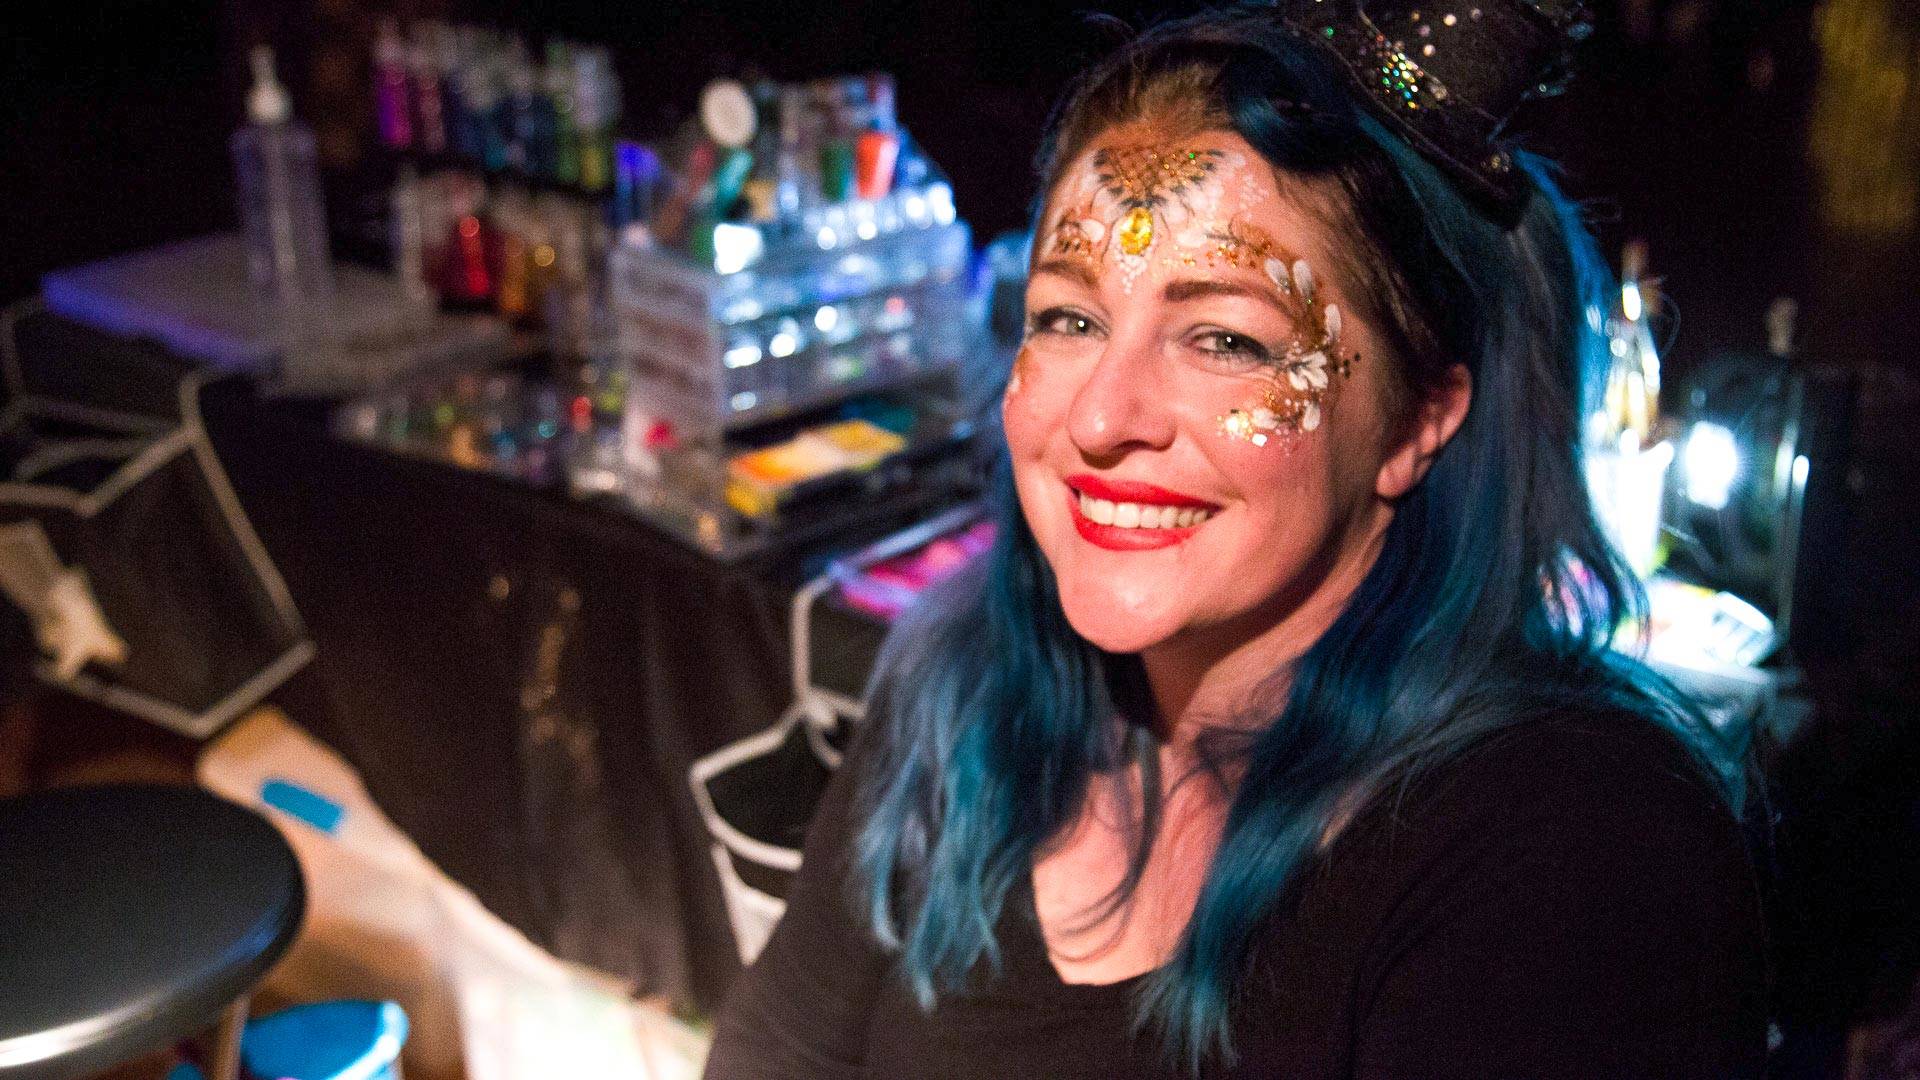 Clementine Lee ran her face-painting business out of her garage in Santa Rosa, painting faces at birthday parties and community events for years. Now, after the fire, she's unsure if she can stay in the city. Estefany Gonzales